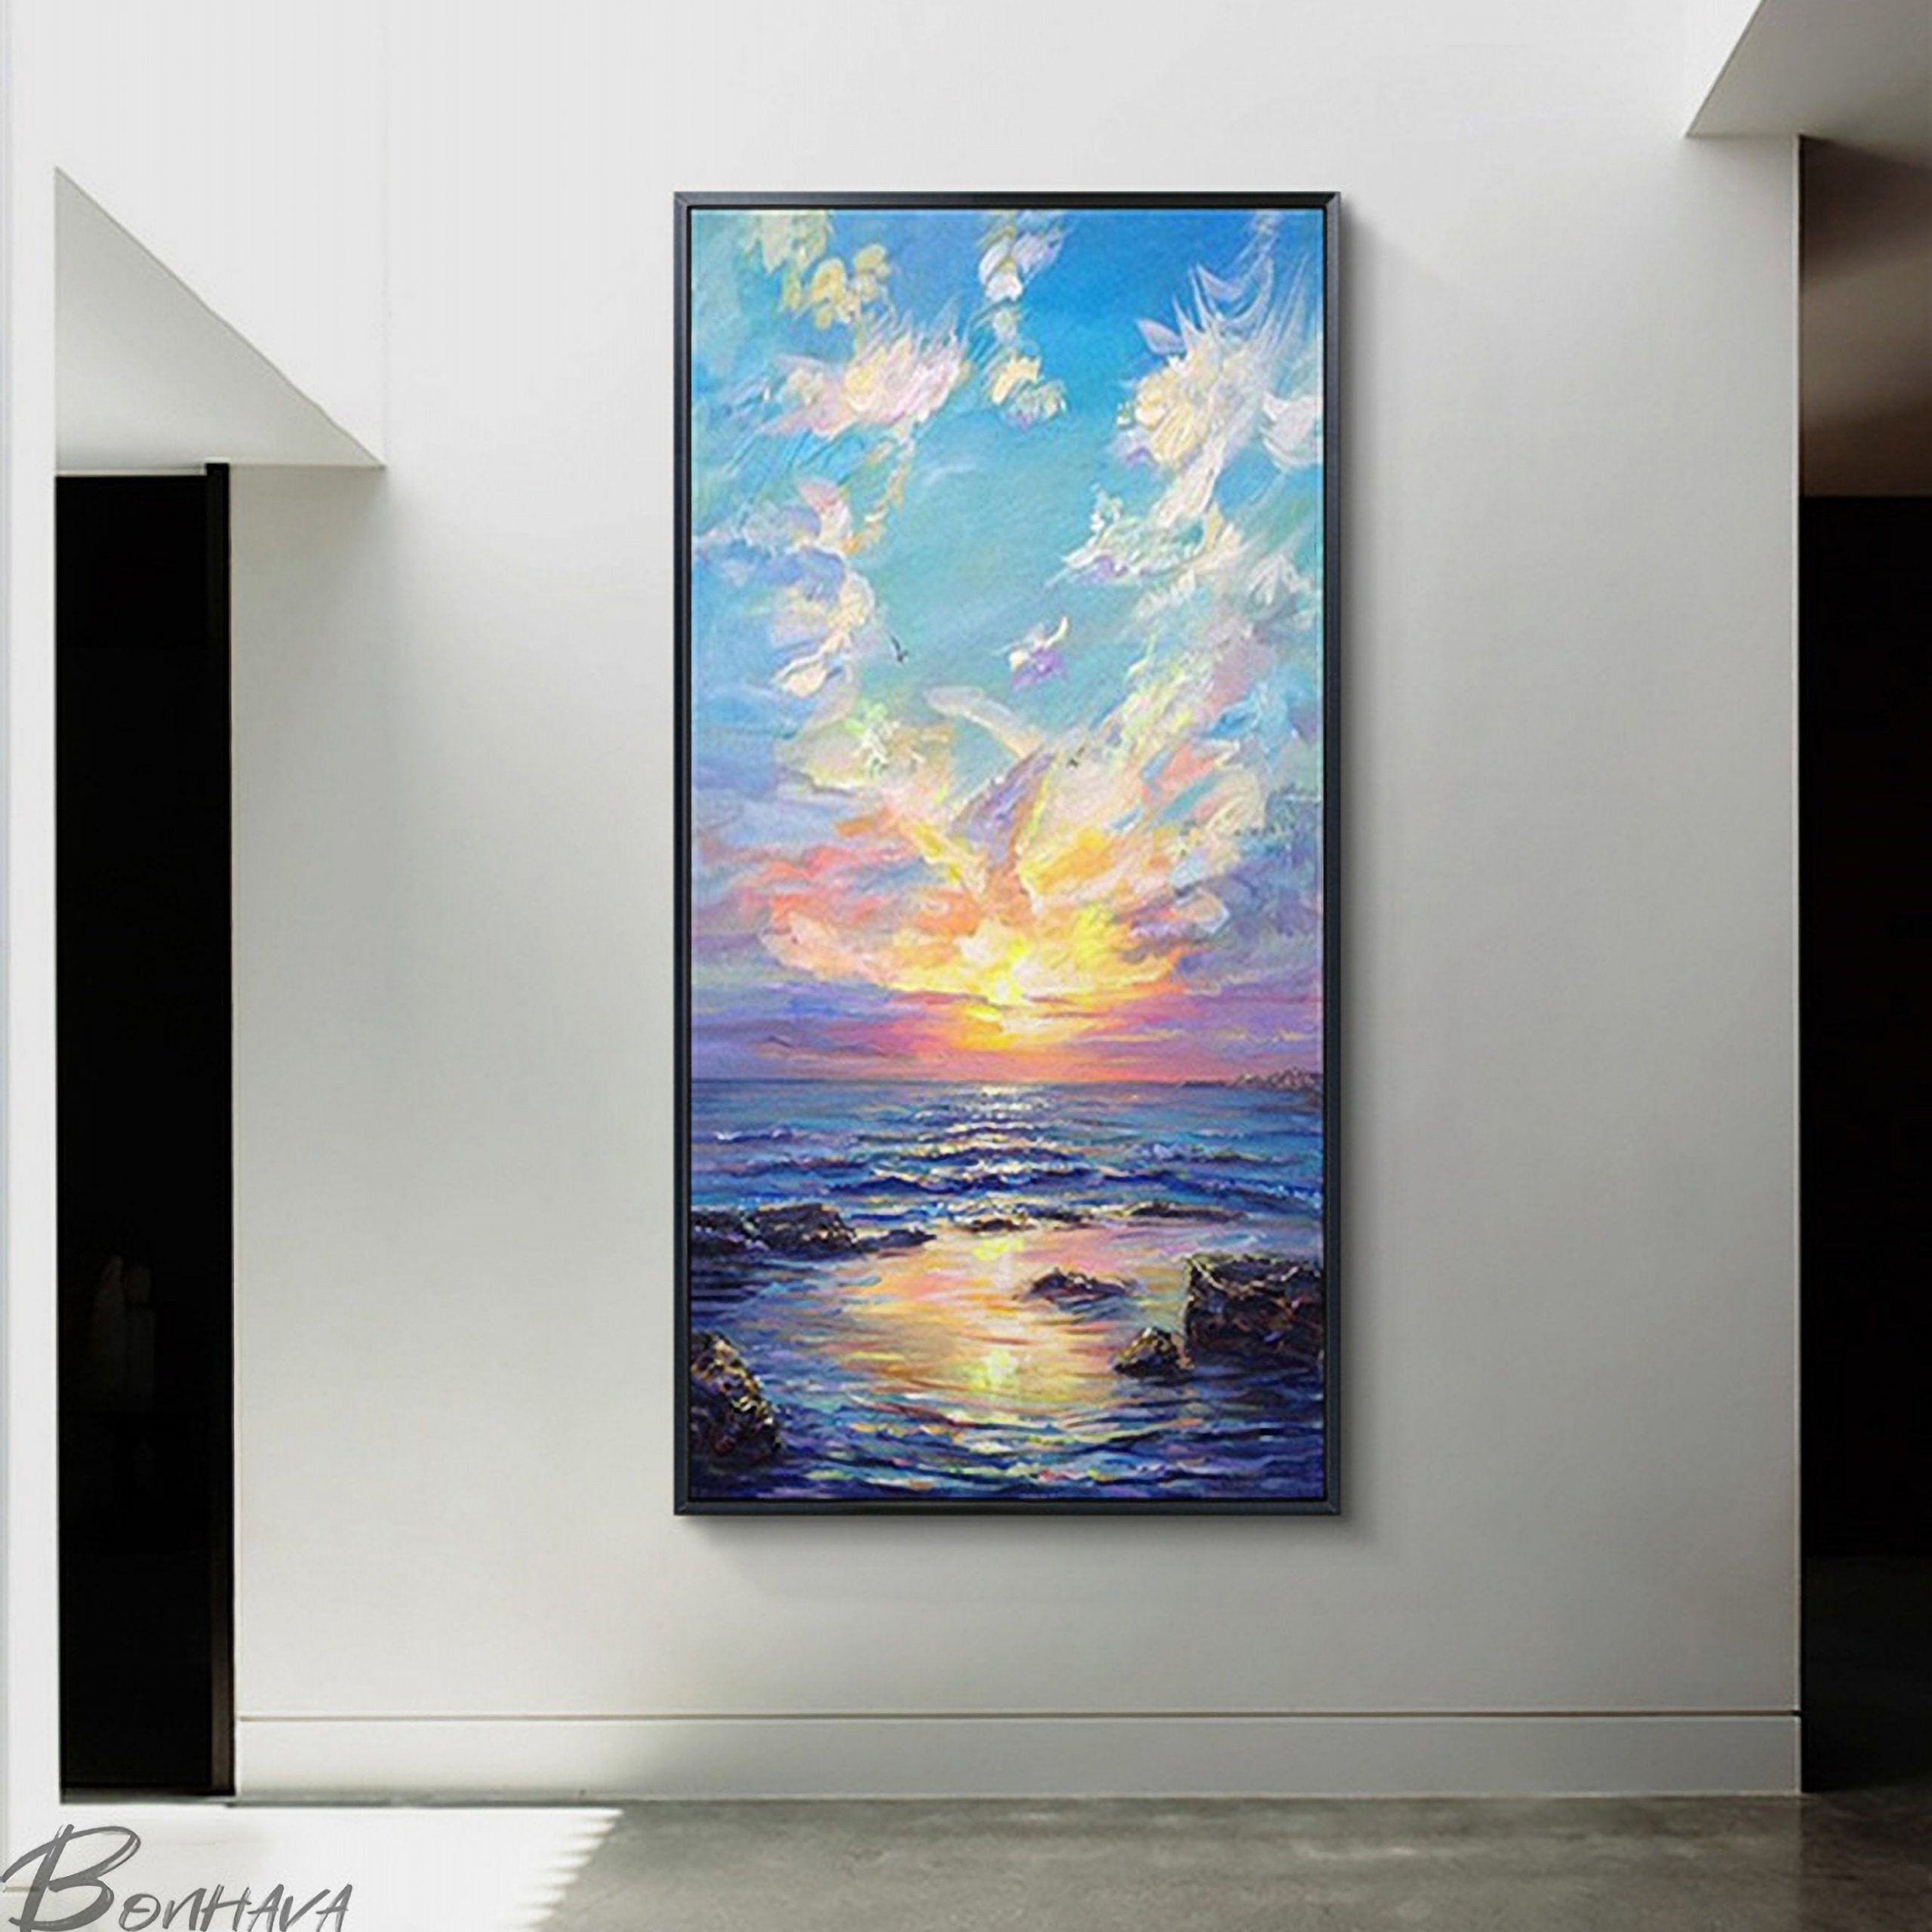 Sea Spray And Sunrise Wall Art Ocean Oil Painting On Canvas – Etsy With 2017 Sunrise Wall Art (View 6 of 20)